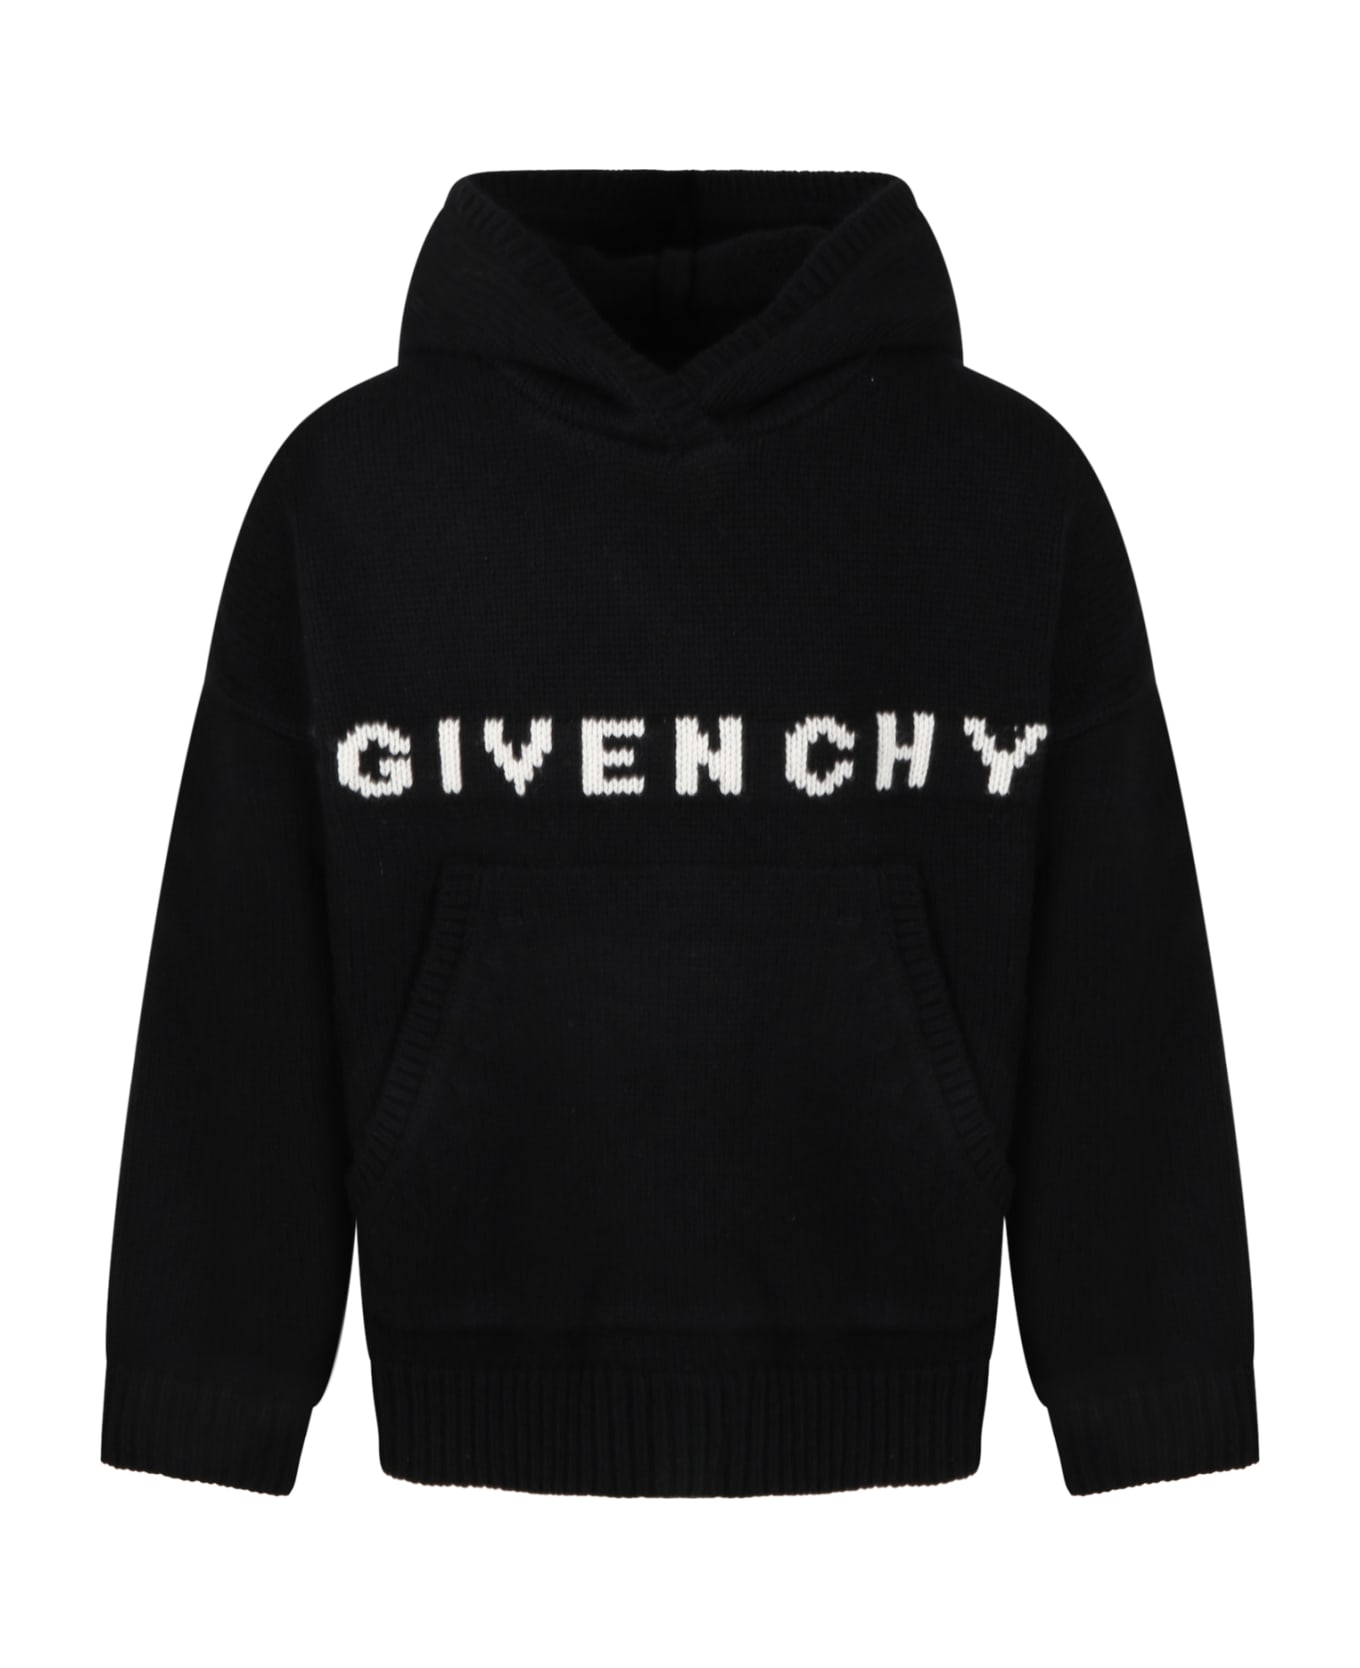 Givenchy Black Sweater For Kids With Logo - Black